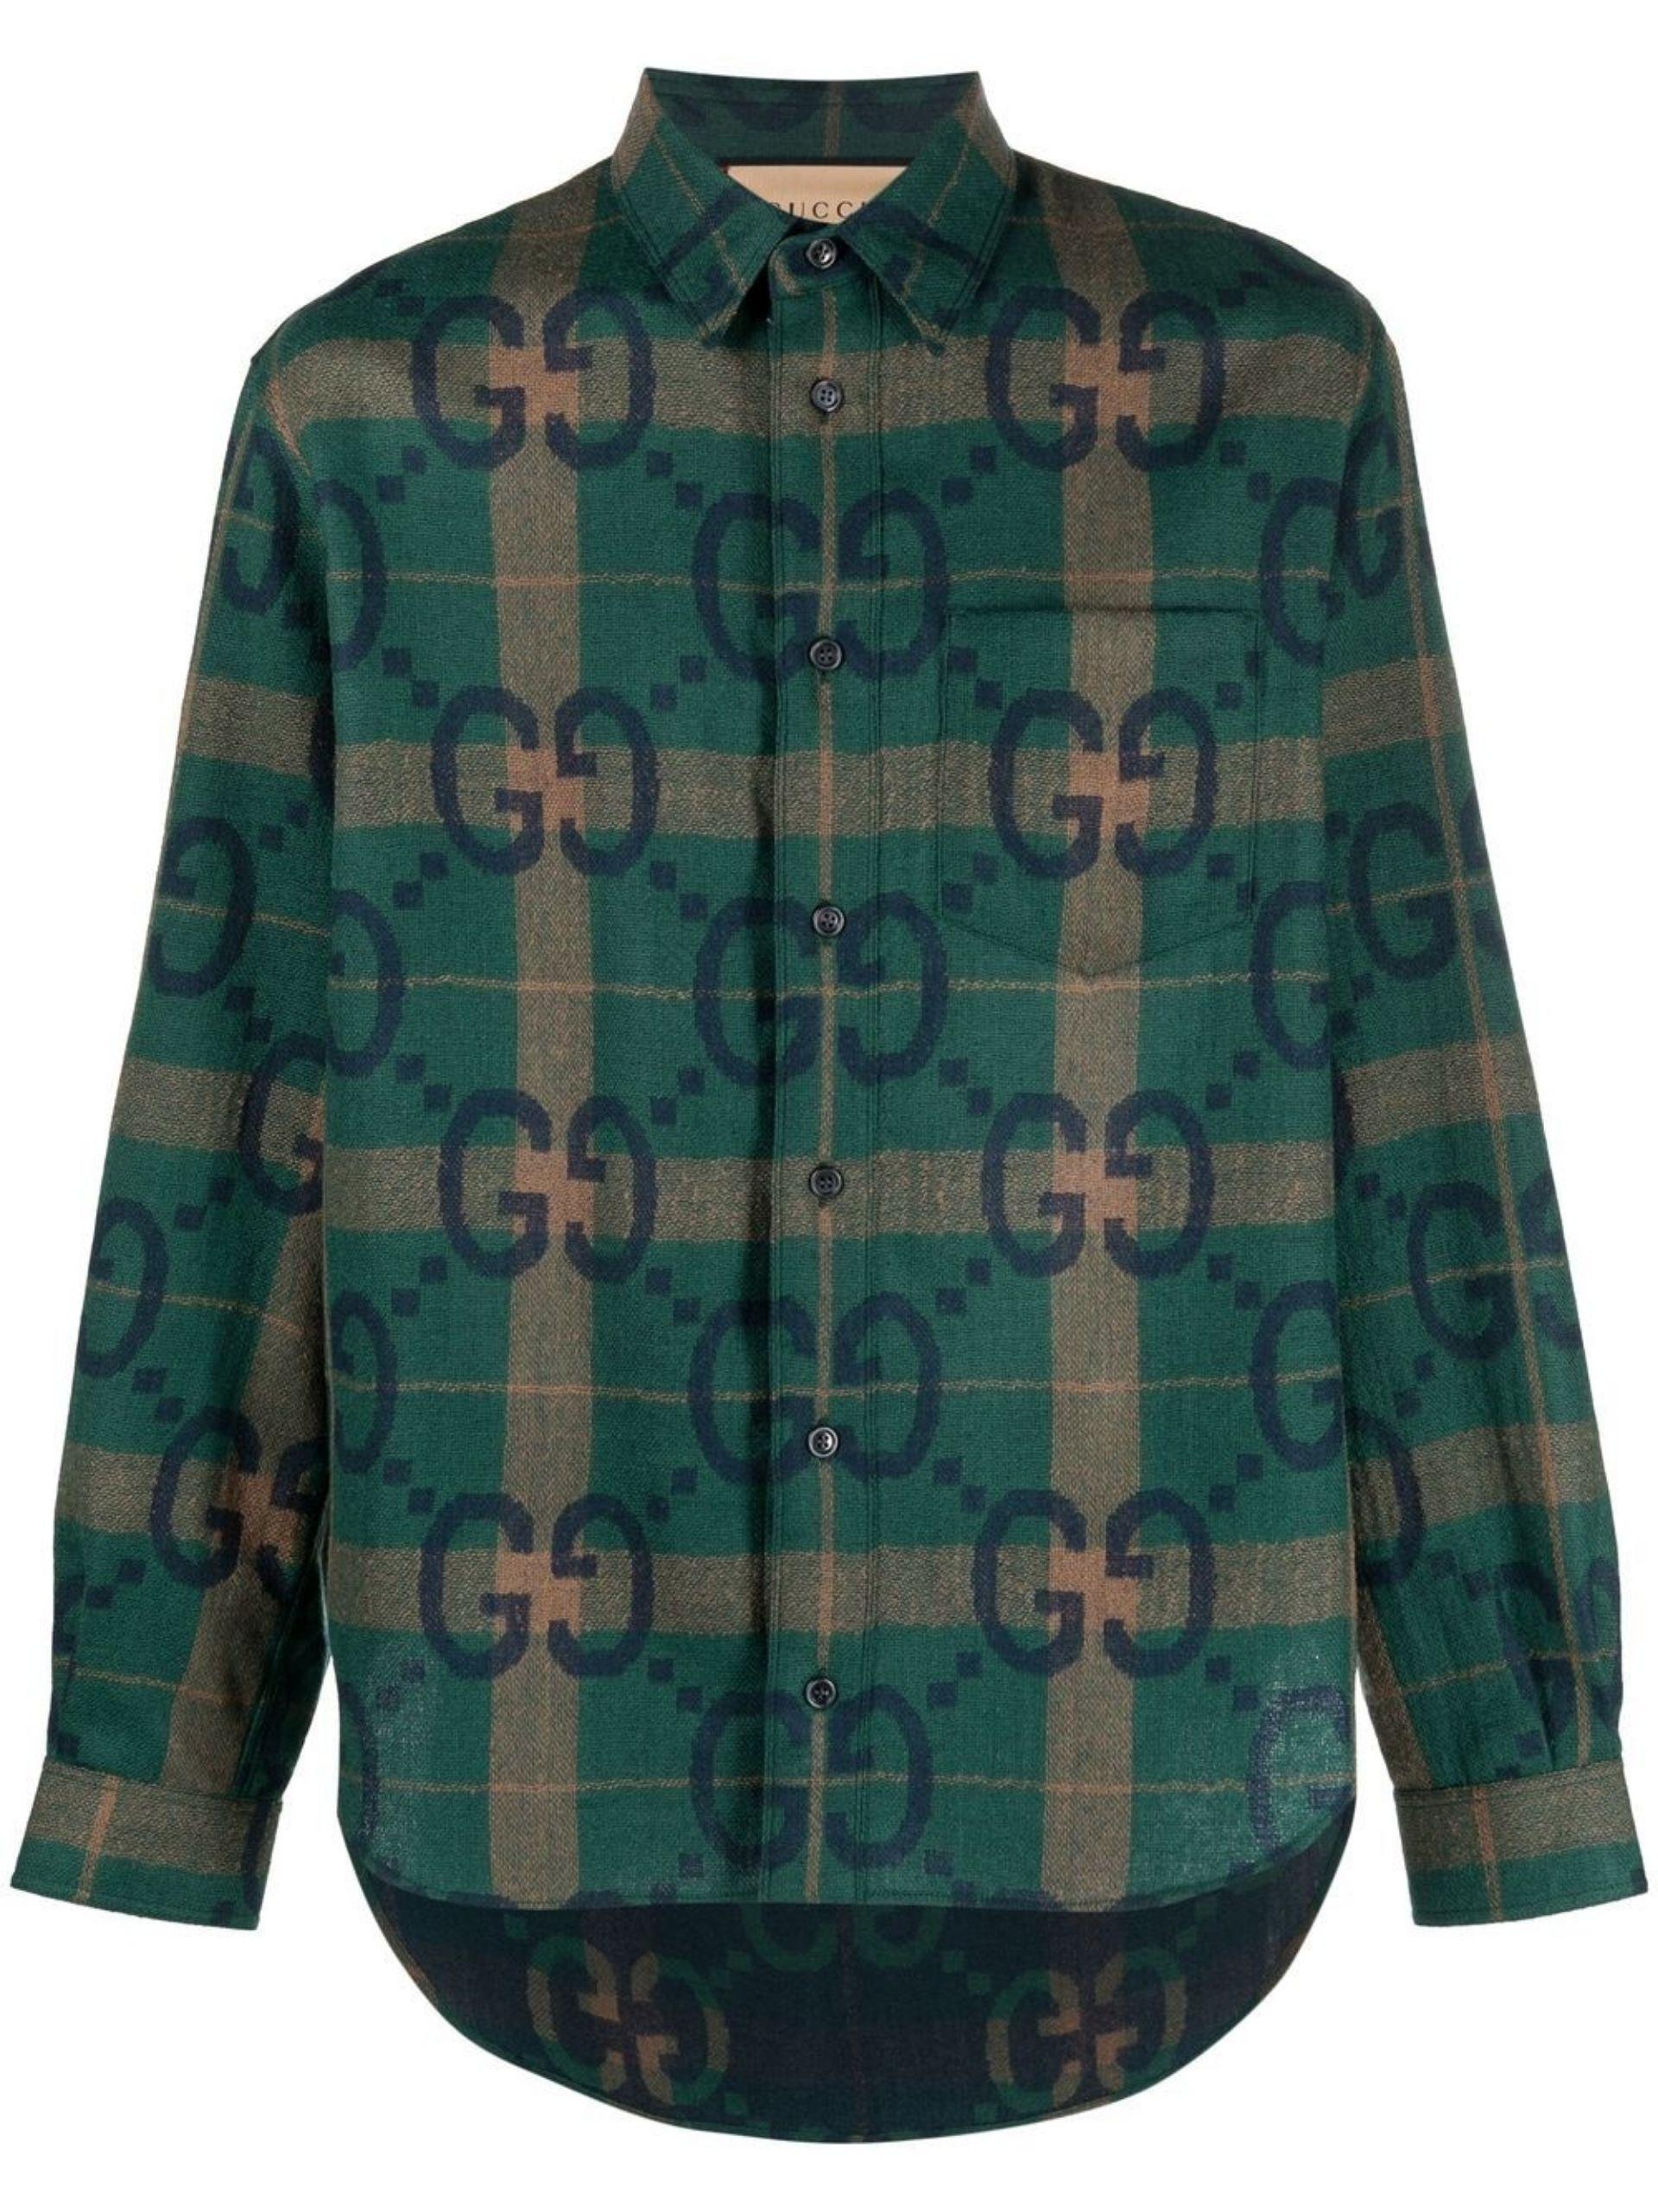 Gucci Checked Monogram-print Shirt in Green for Men